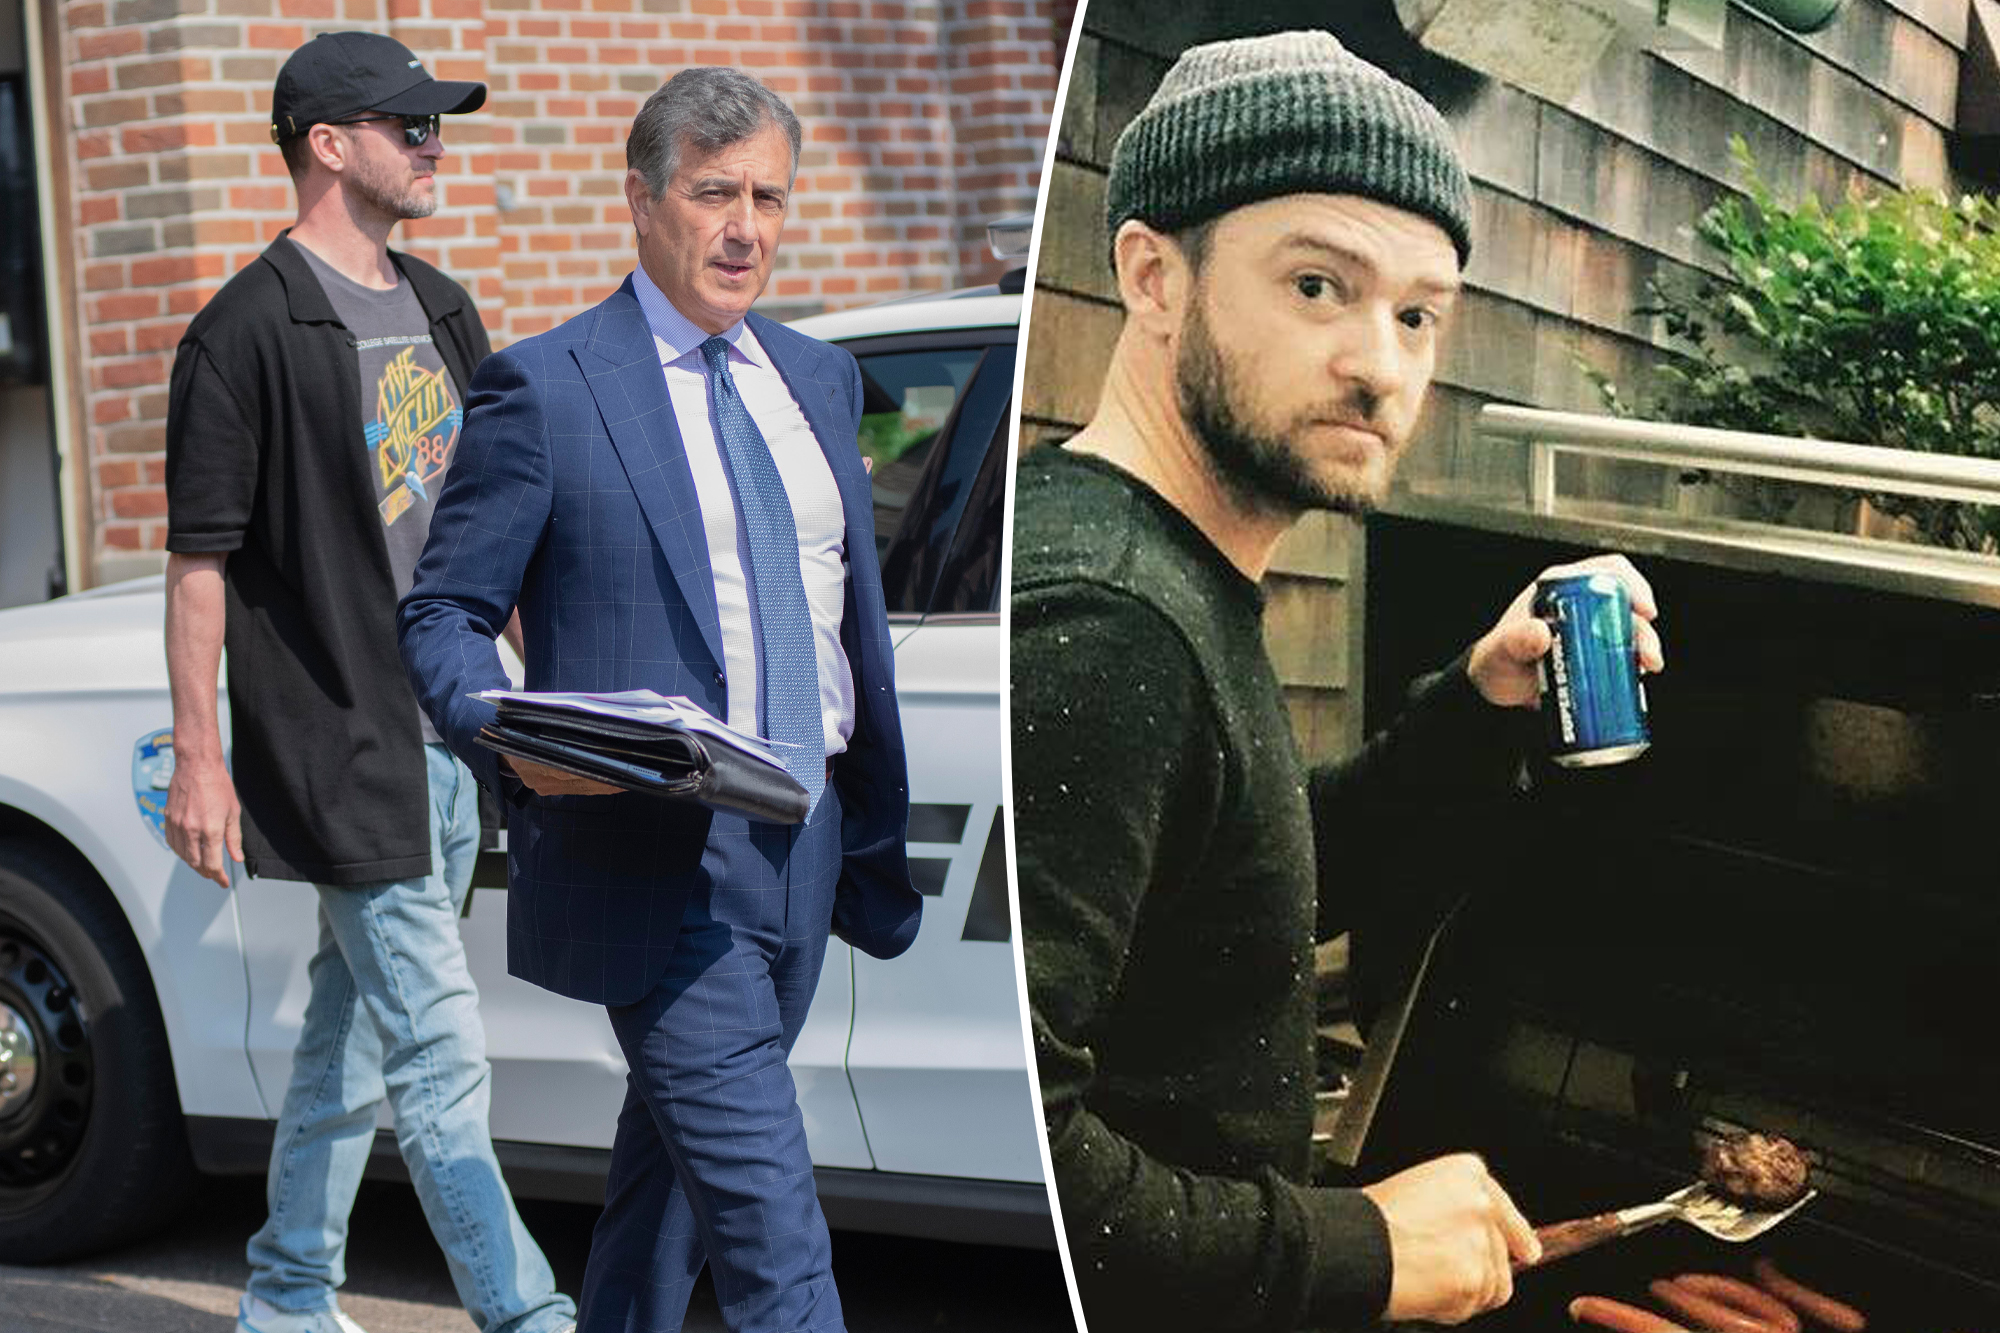 Justin Timberlake's Wild Night: DWI Arrest in the Hamptons and NYC Return Drama Unfolds!